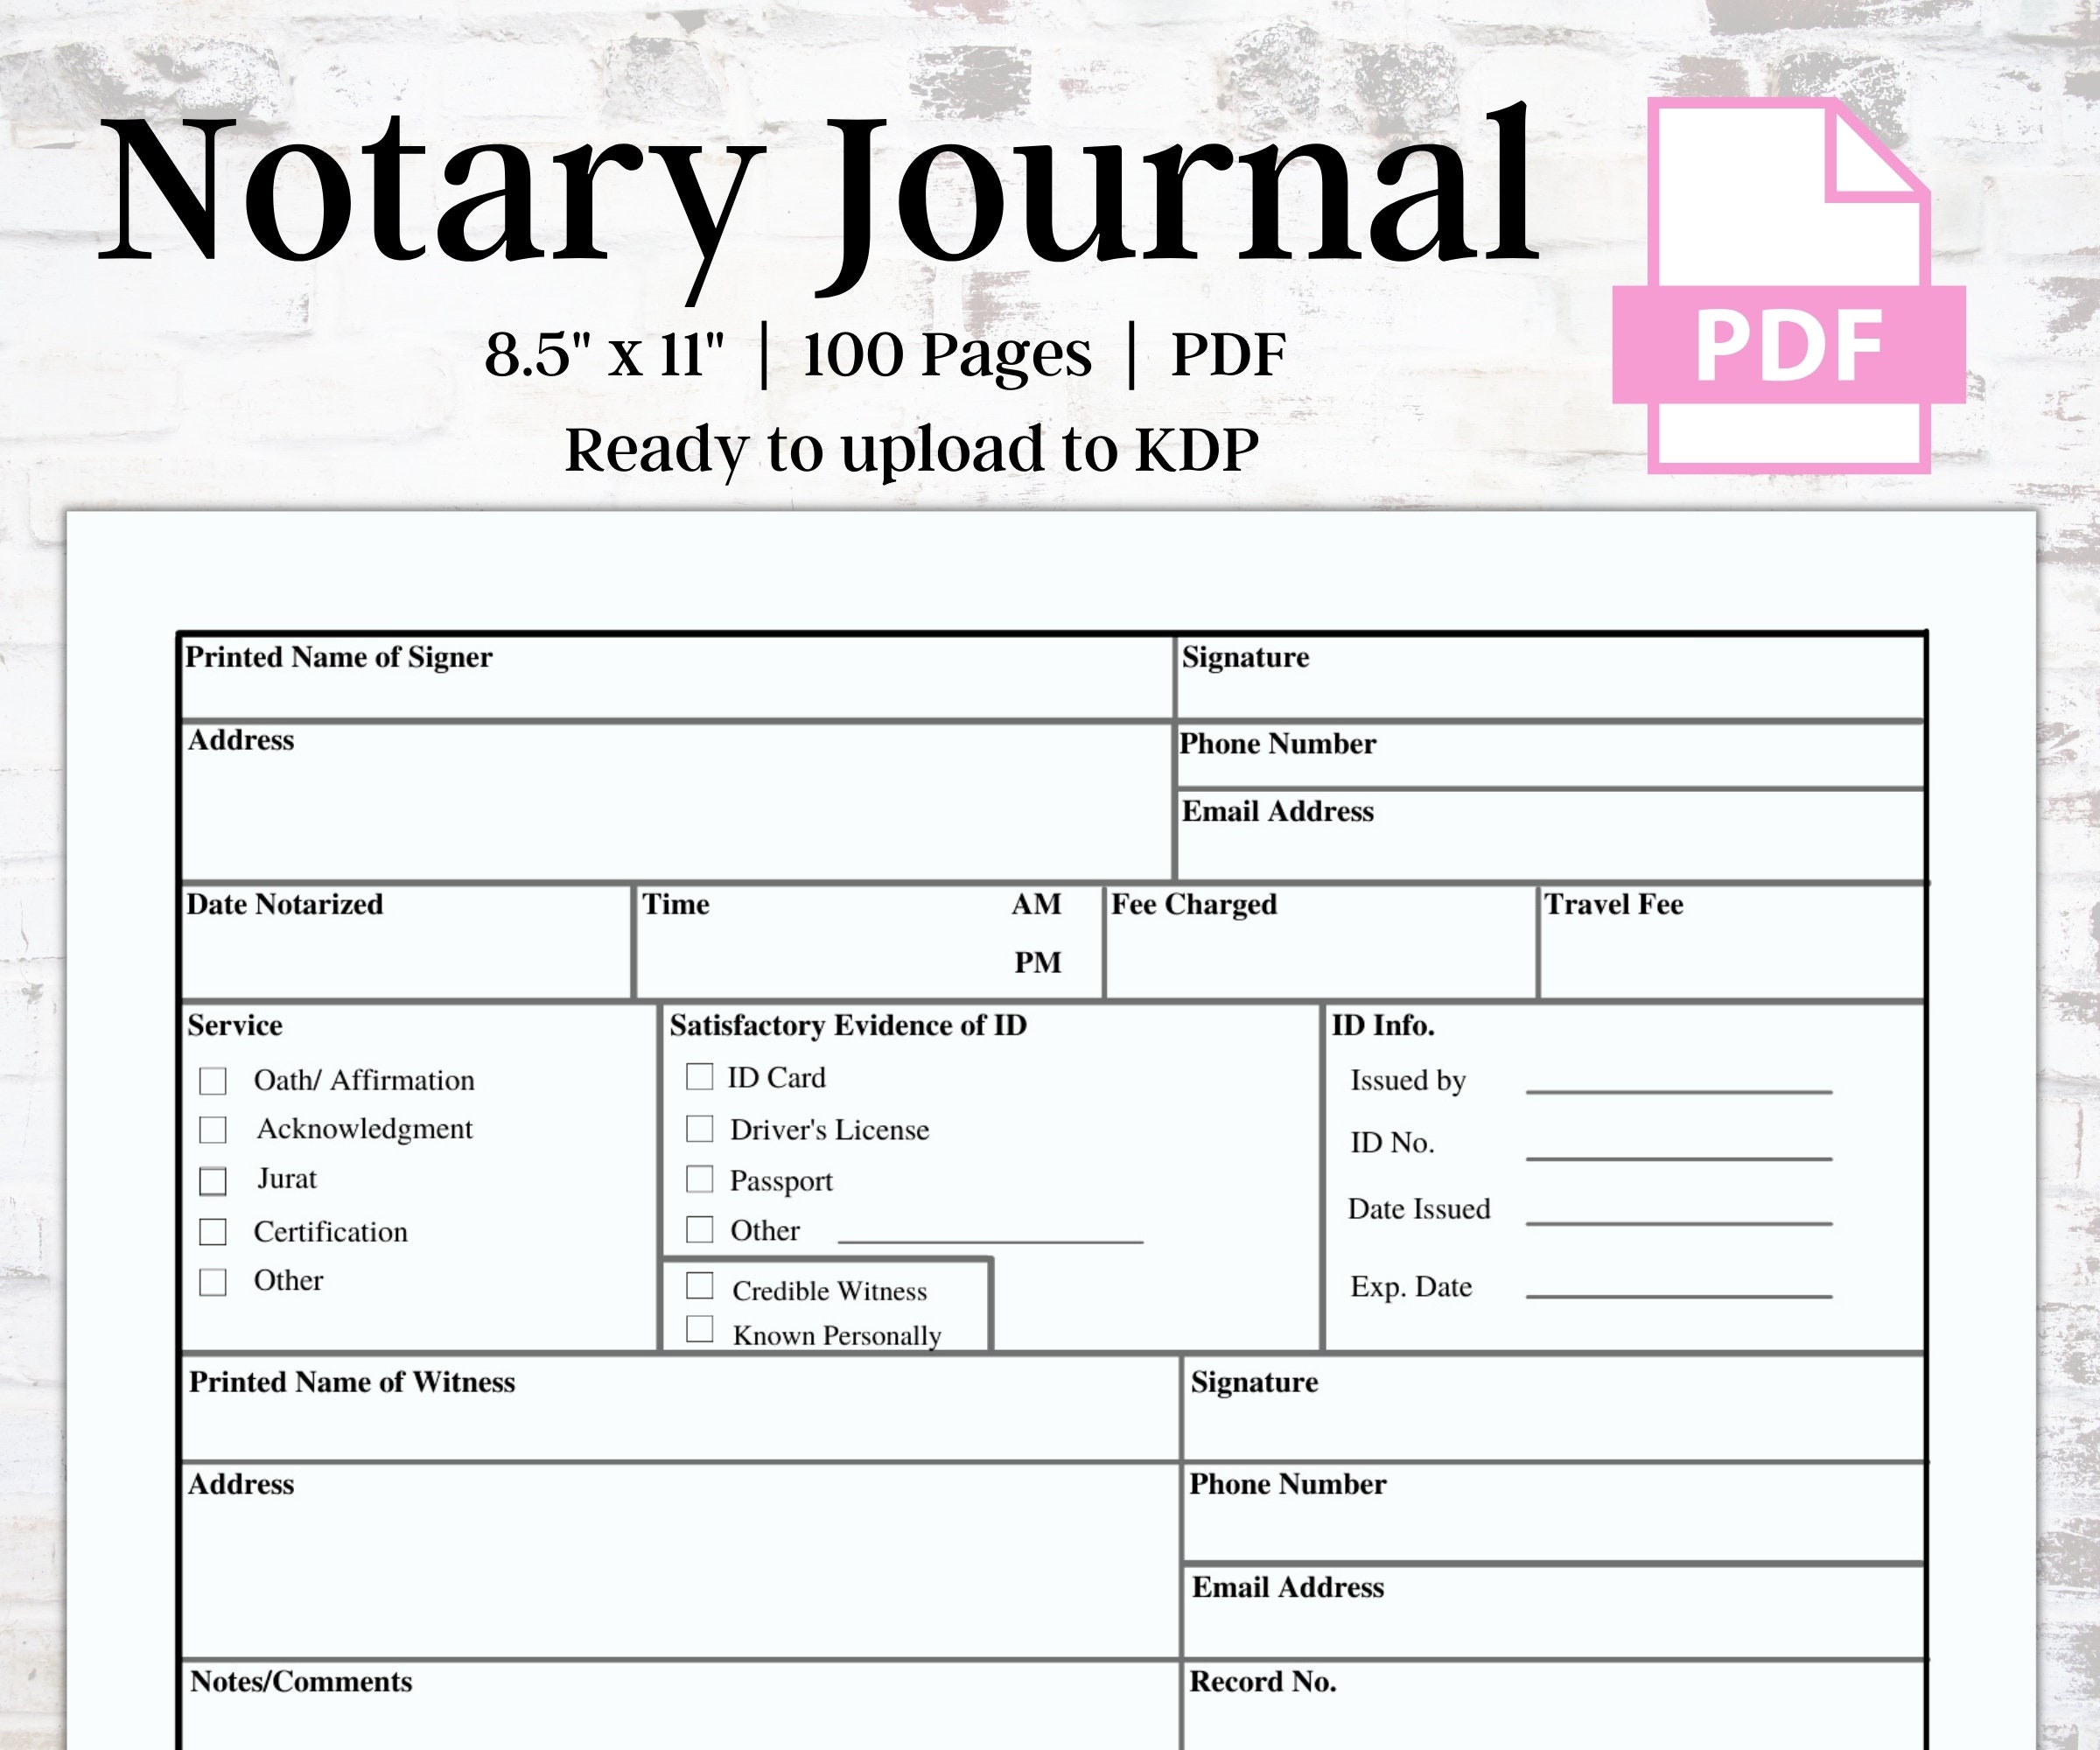 notary-journal-notary-record-log-book-instant-download-kdp-interior-pdf